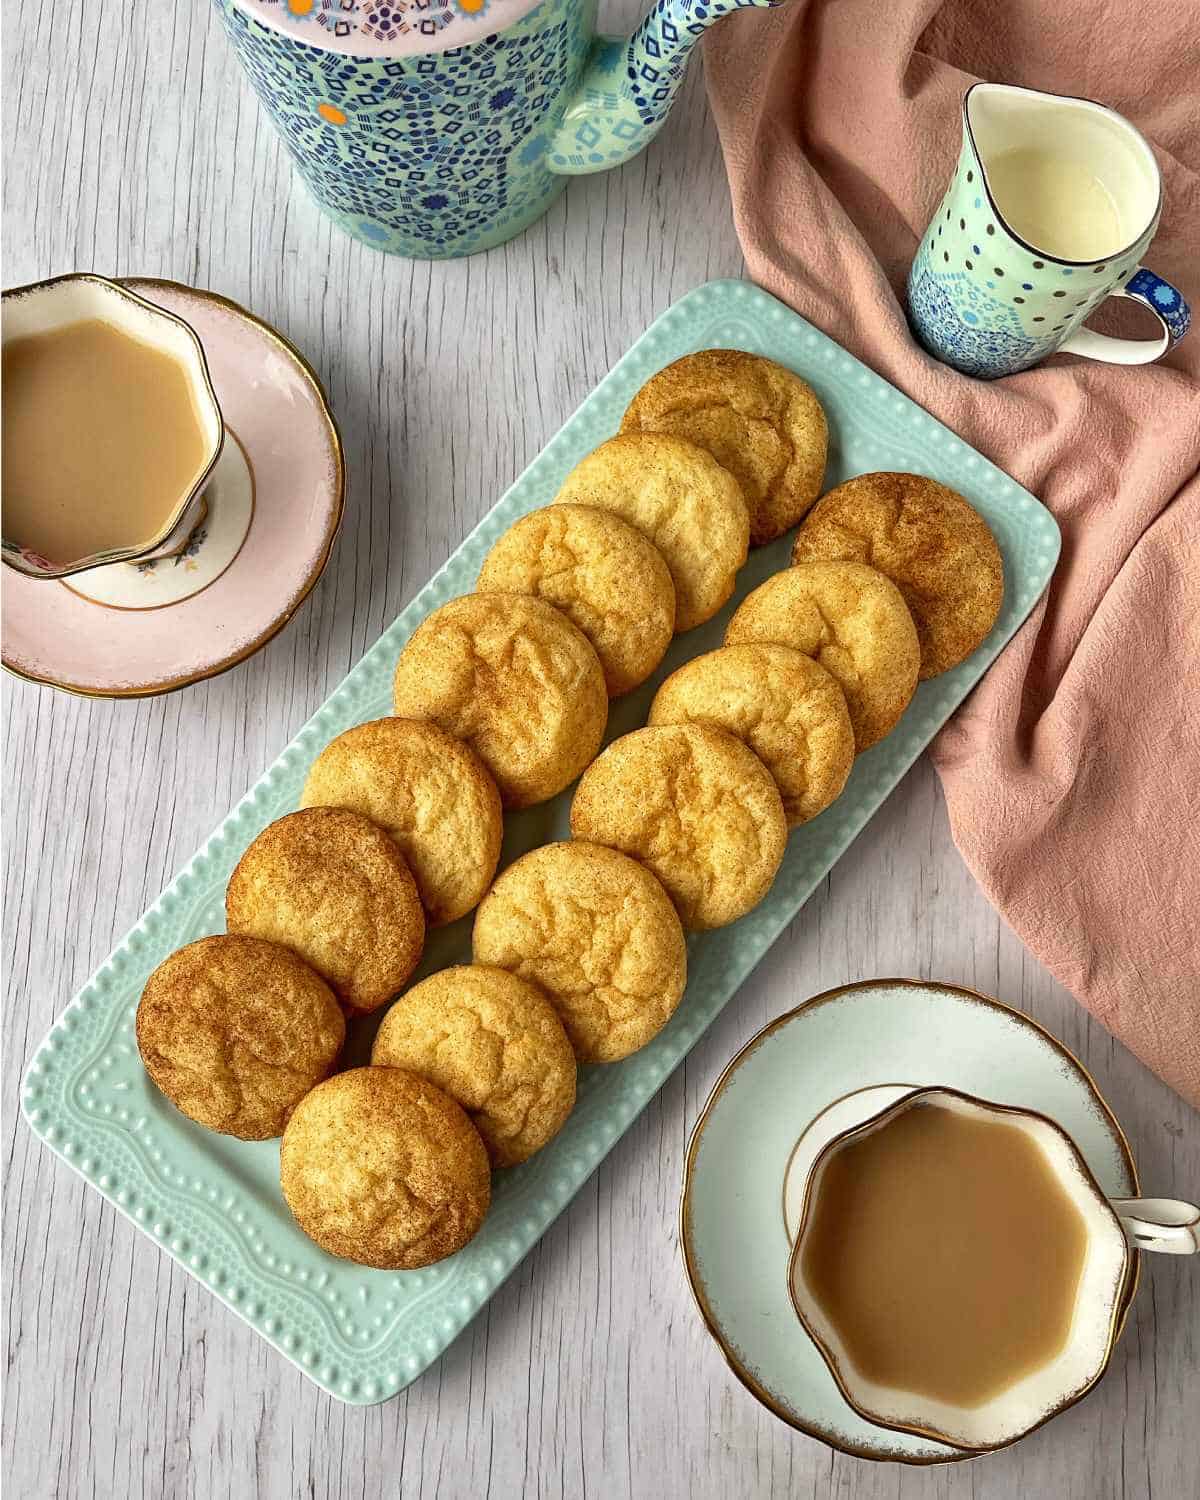 Baked snickerdoodle cookies on a blue platter surrounded by cups of tea.